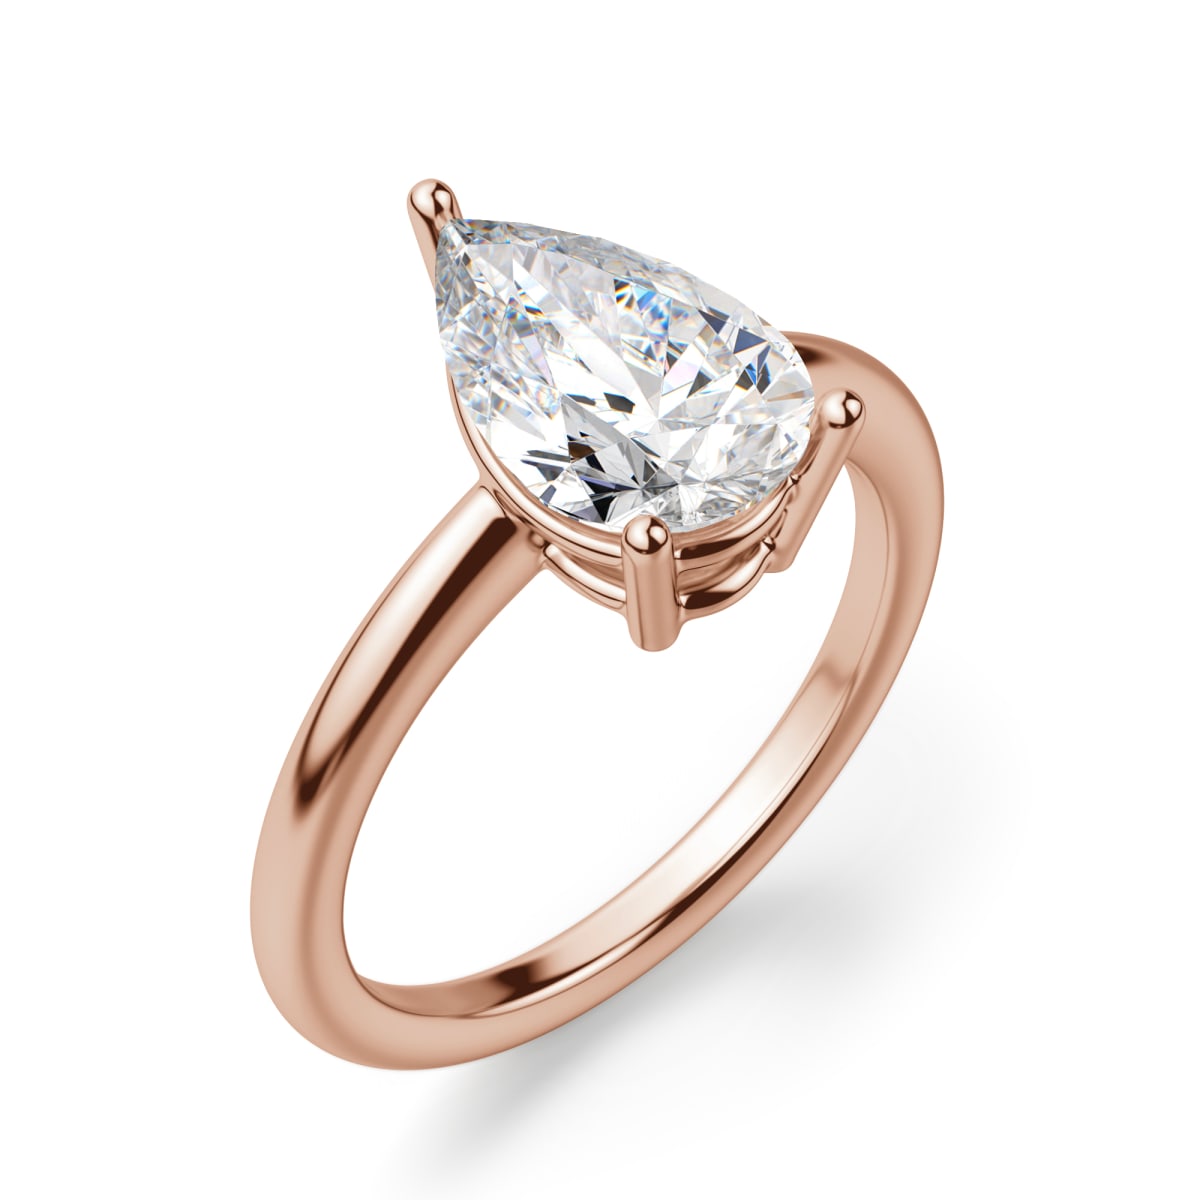 Basket Set Classic Engagement Ring With 1.50 Pear Center, Ring Size 4.5, 14K Rose Gold, Lab Grown Diamond